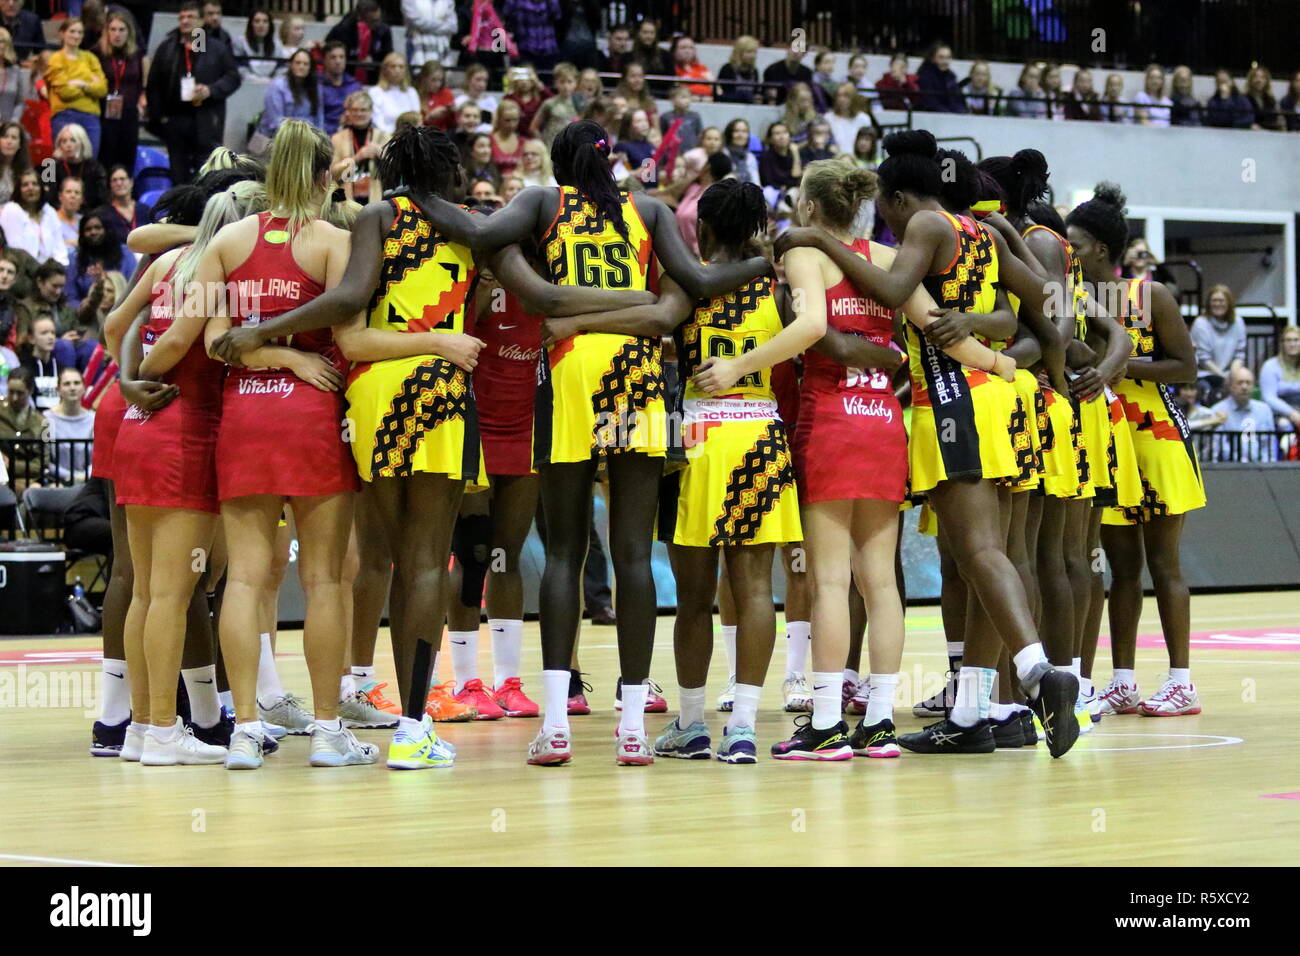 LONDON, UK. 2nd Dec, 2018. Teams group at the end of The Vitality Netball International Series match between England and Uganda at the Copper Box Arena on December 2, 2018 in London, England, UK Credit: Grant Burton/Alamy Live News Stock Photo